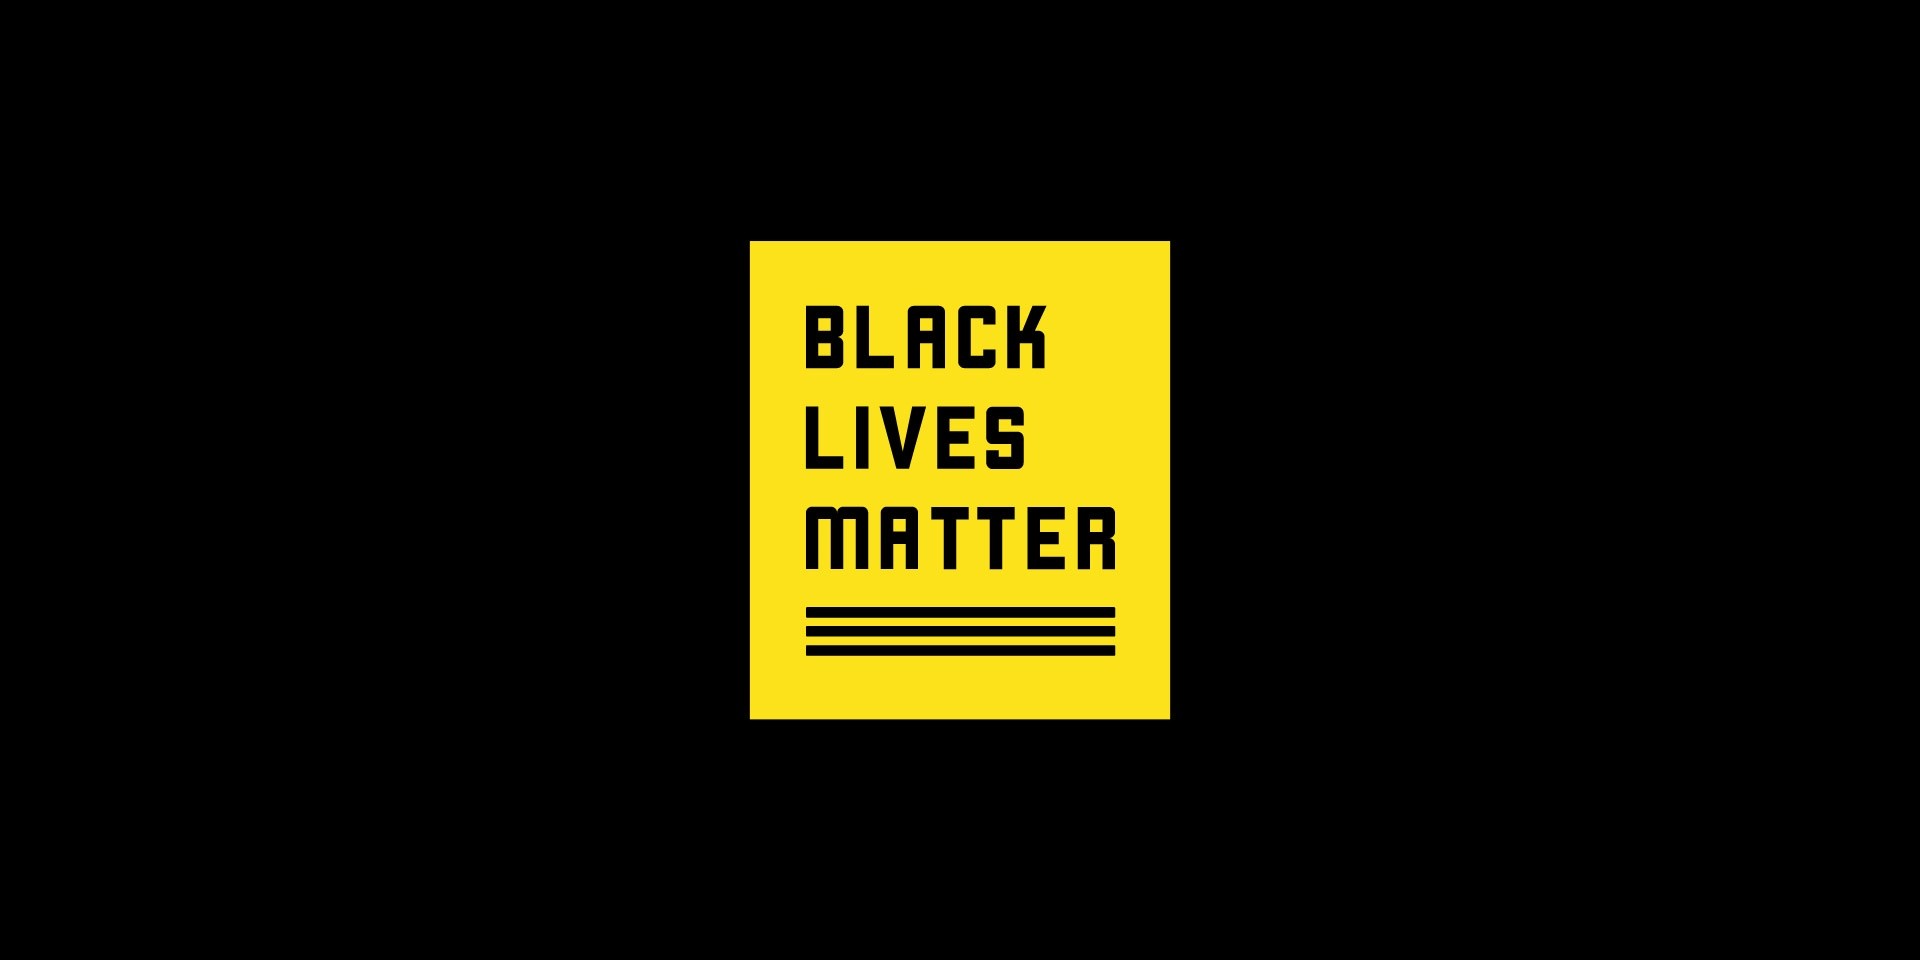 Asian artists take a stand to support the Black Lives Matter movement